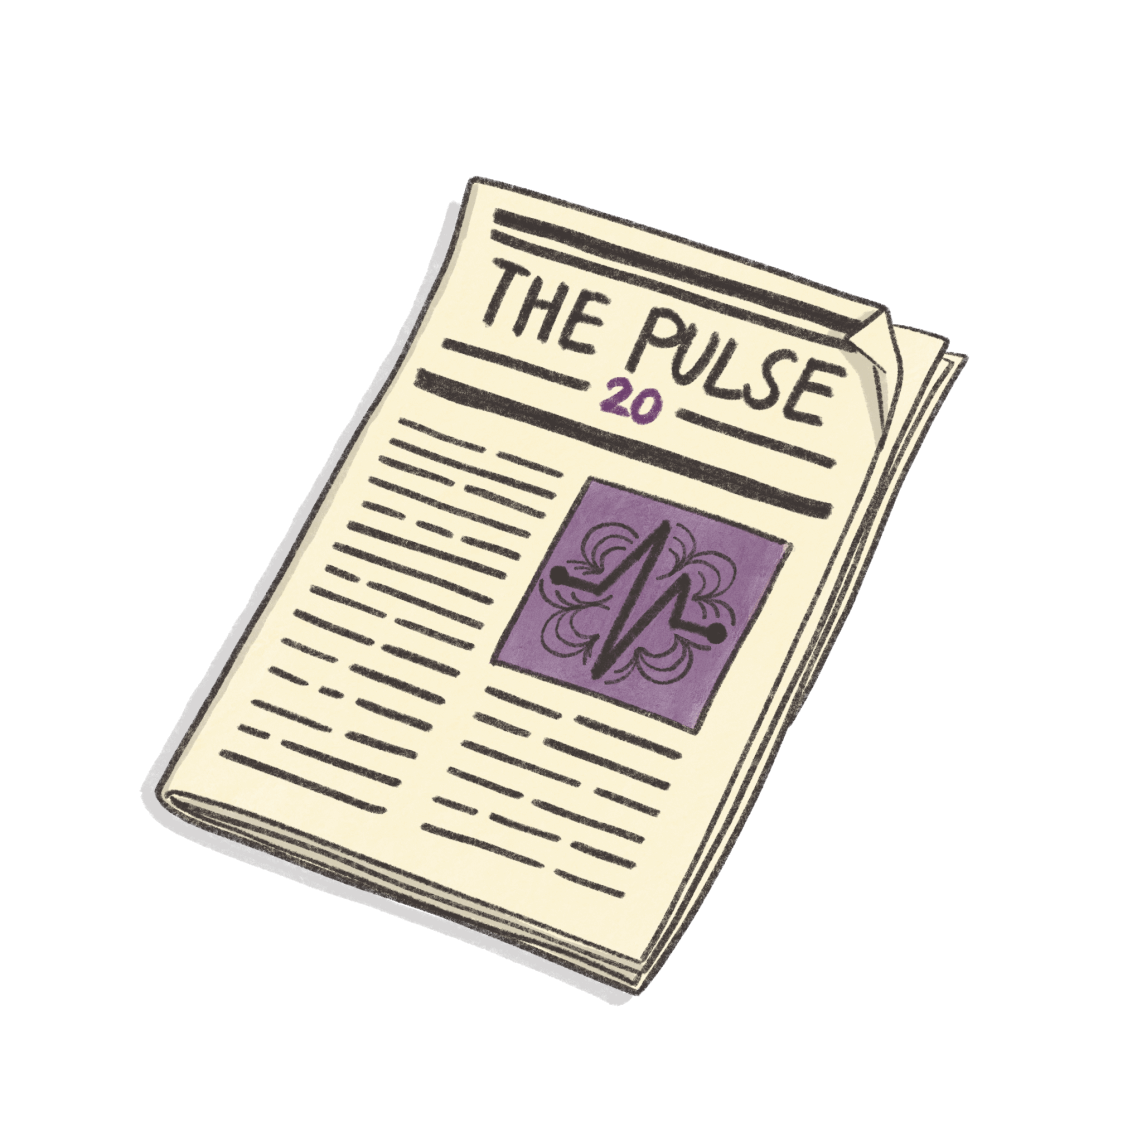 The Apoio Pulse – Issue 20 image